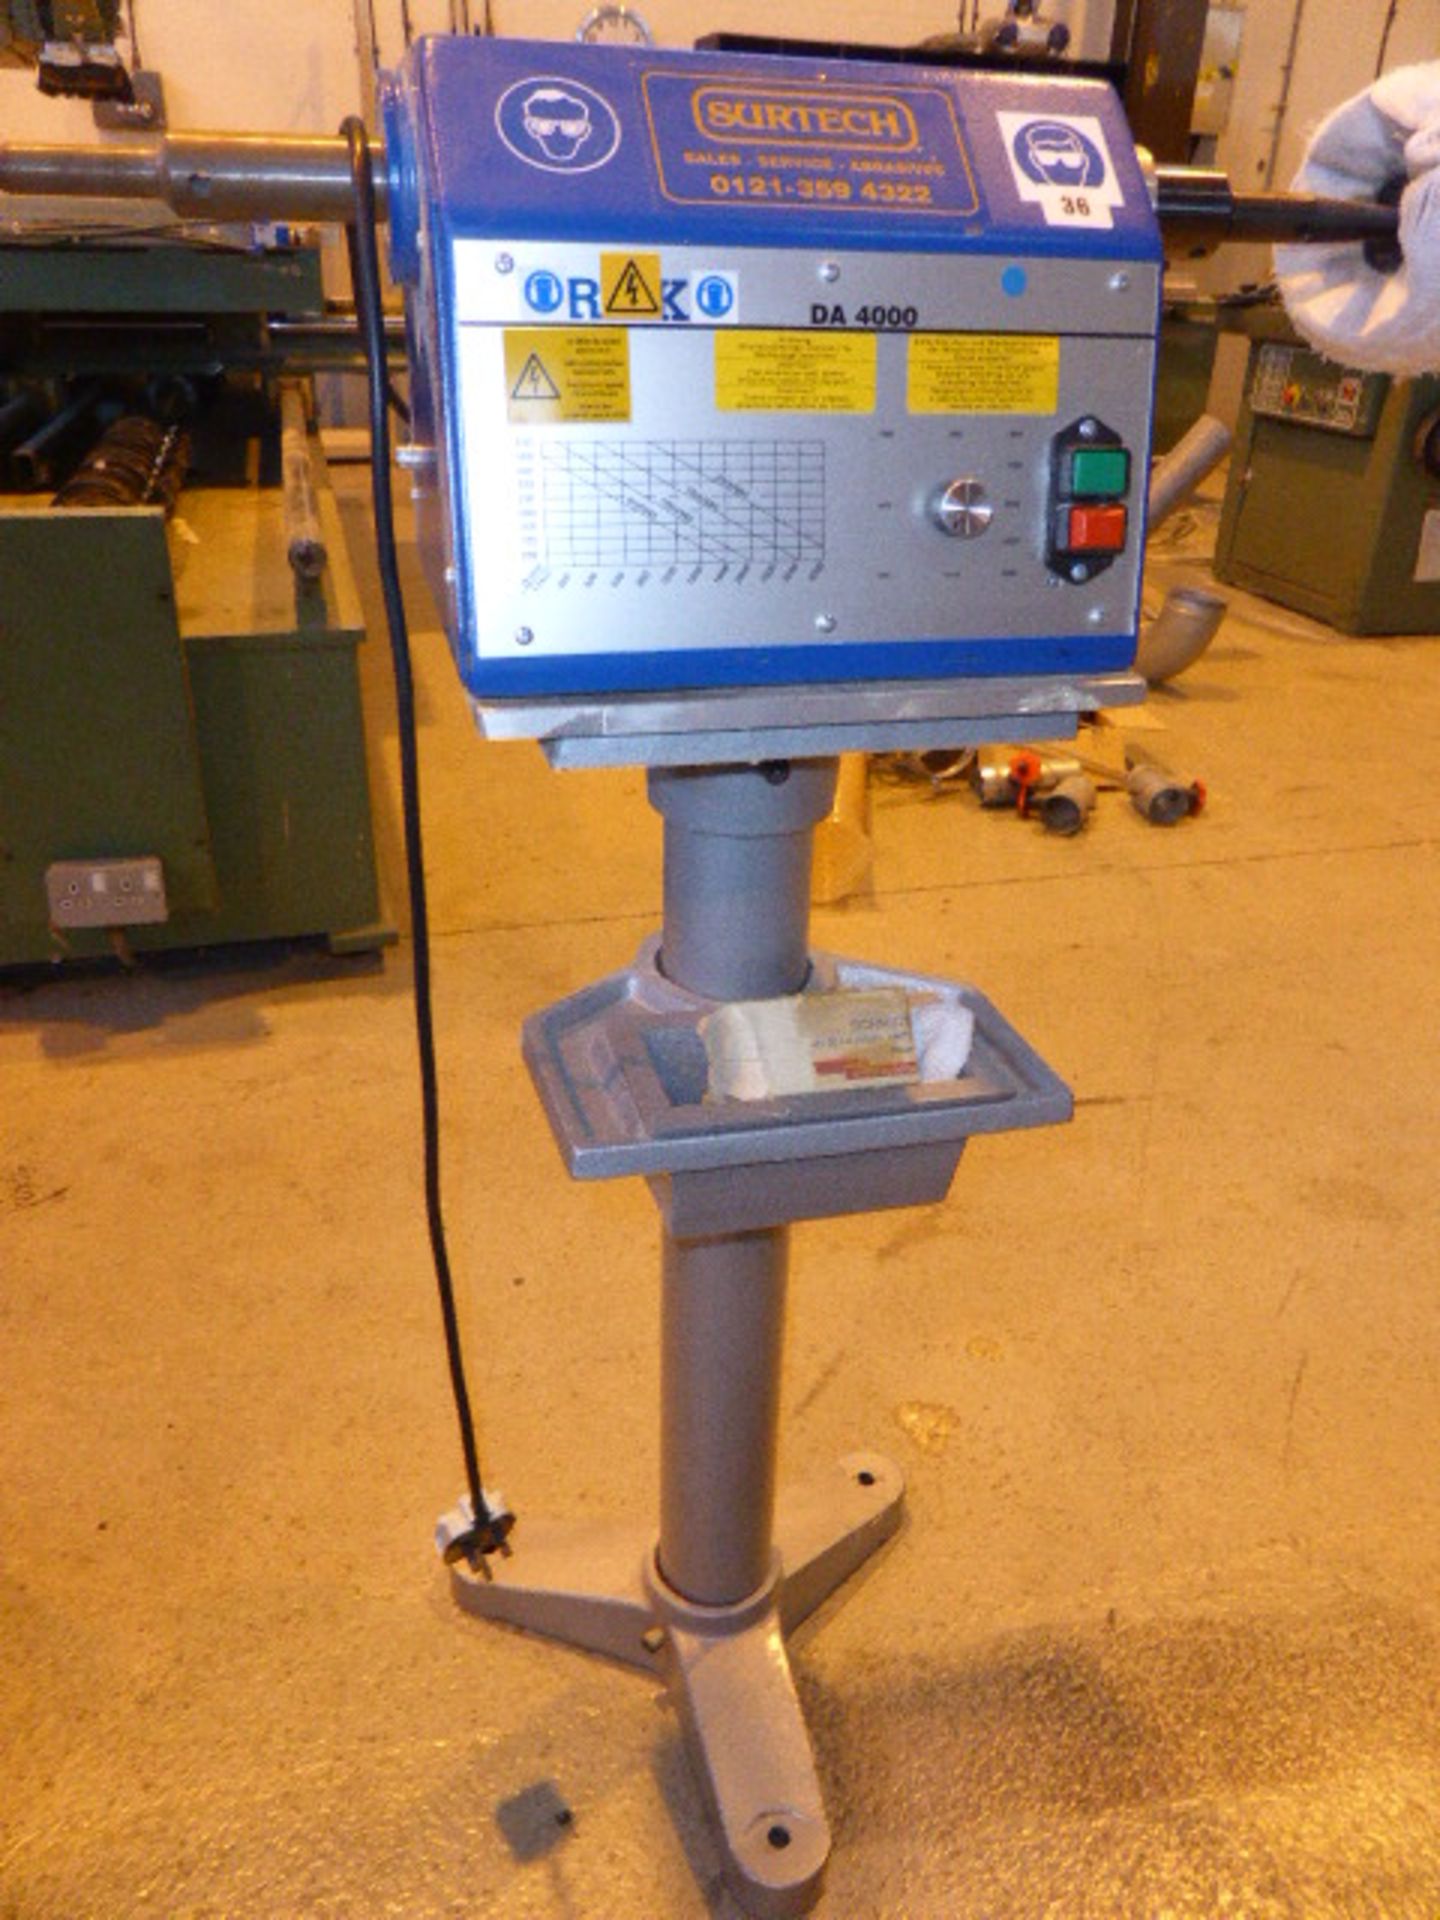 Surtech single phase electric polishing spindle on pedestal mount with a range of polishing heads - Image 3 of 5